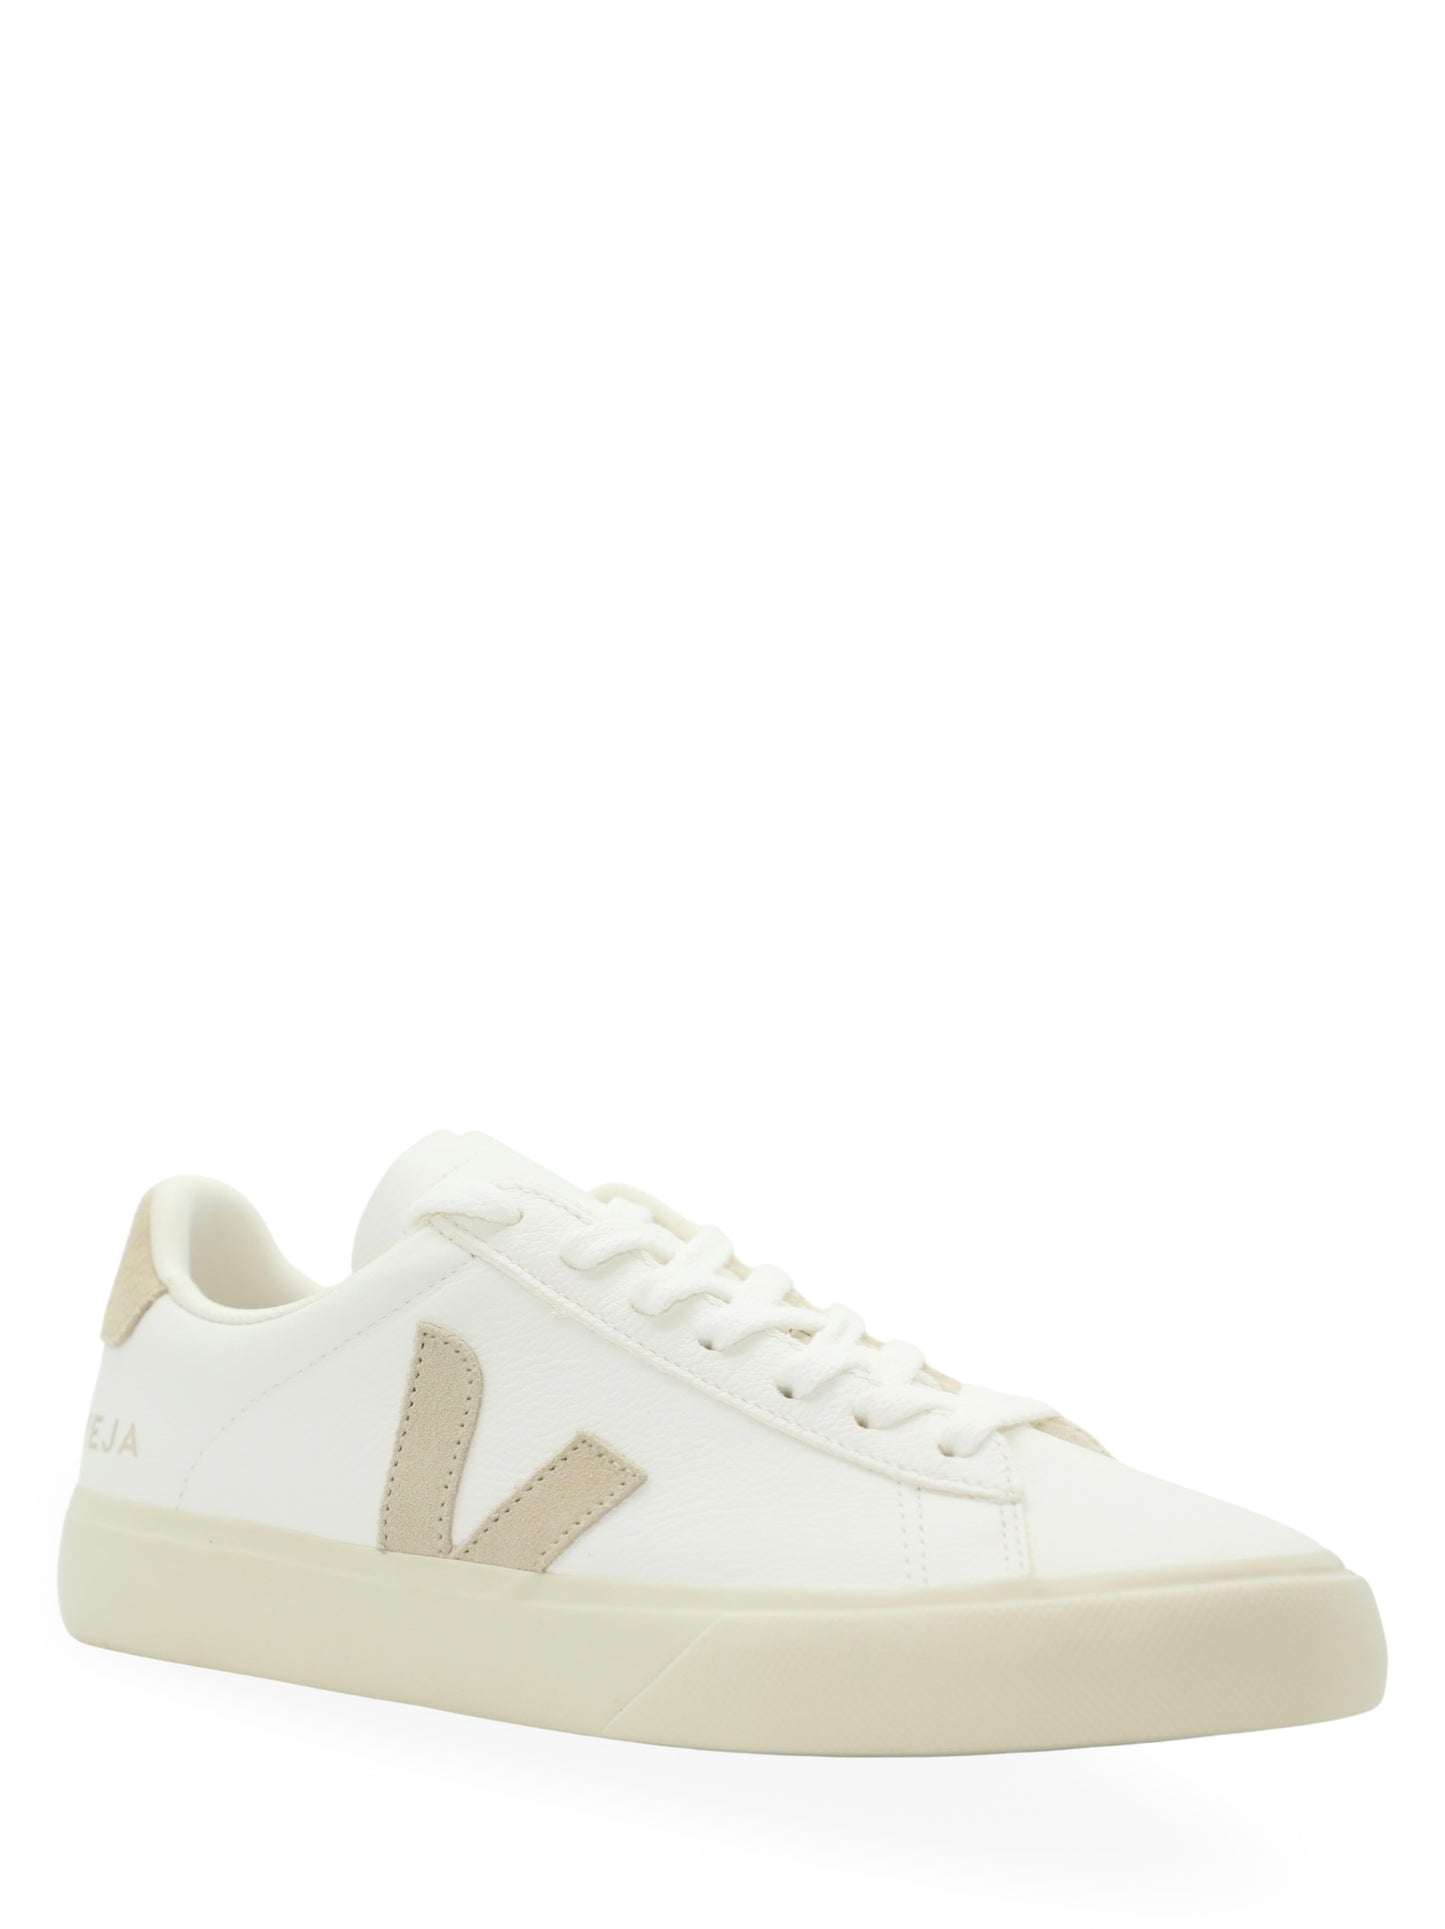 Veja Campo Chromefree Leather Sneaker in Extra-White/Almond